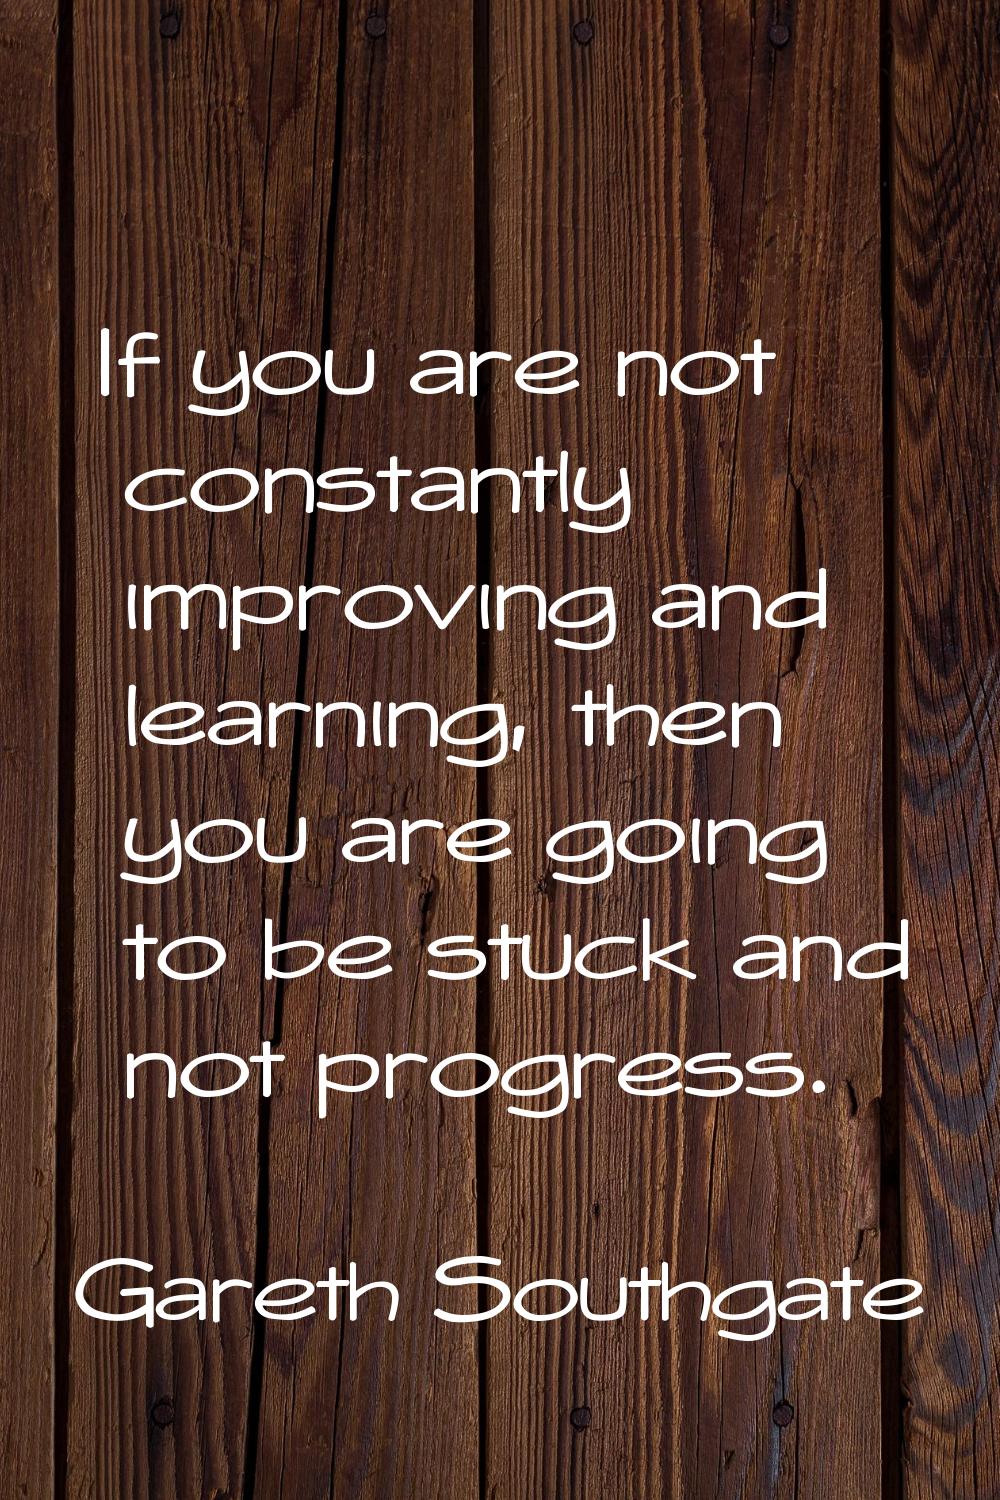 If you are not constantly improving and learning, then you are going to be stuck and not progress.